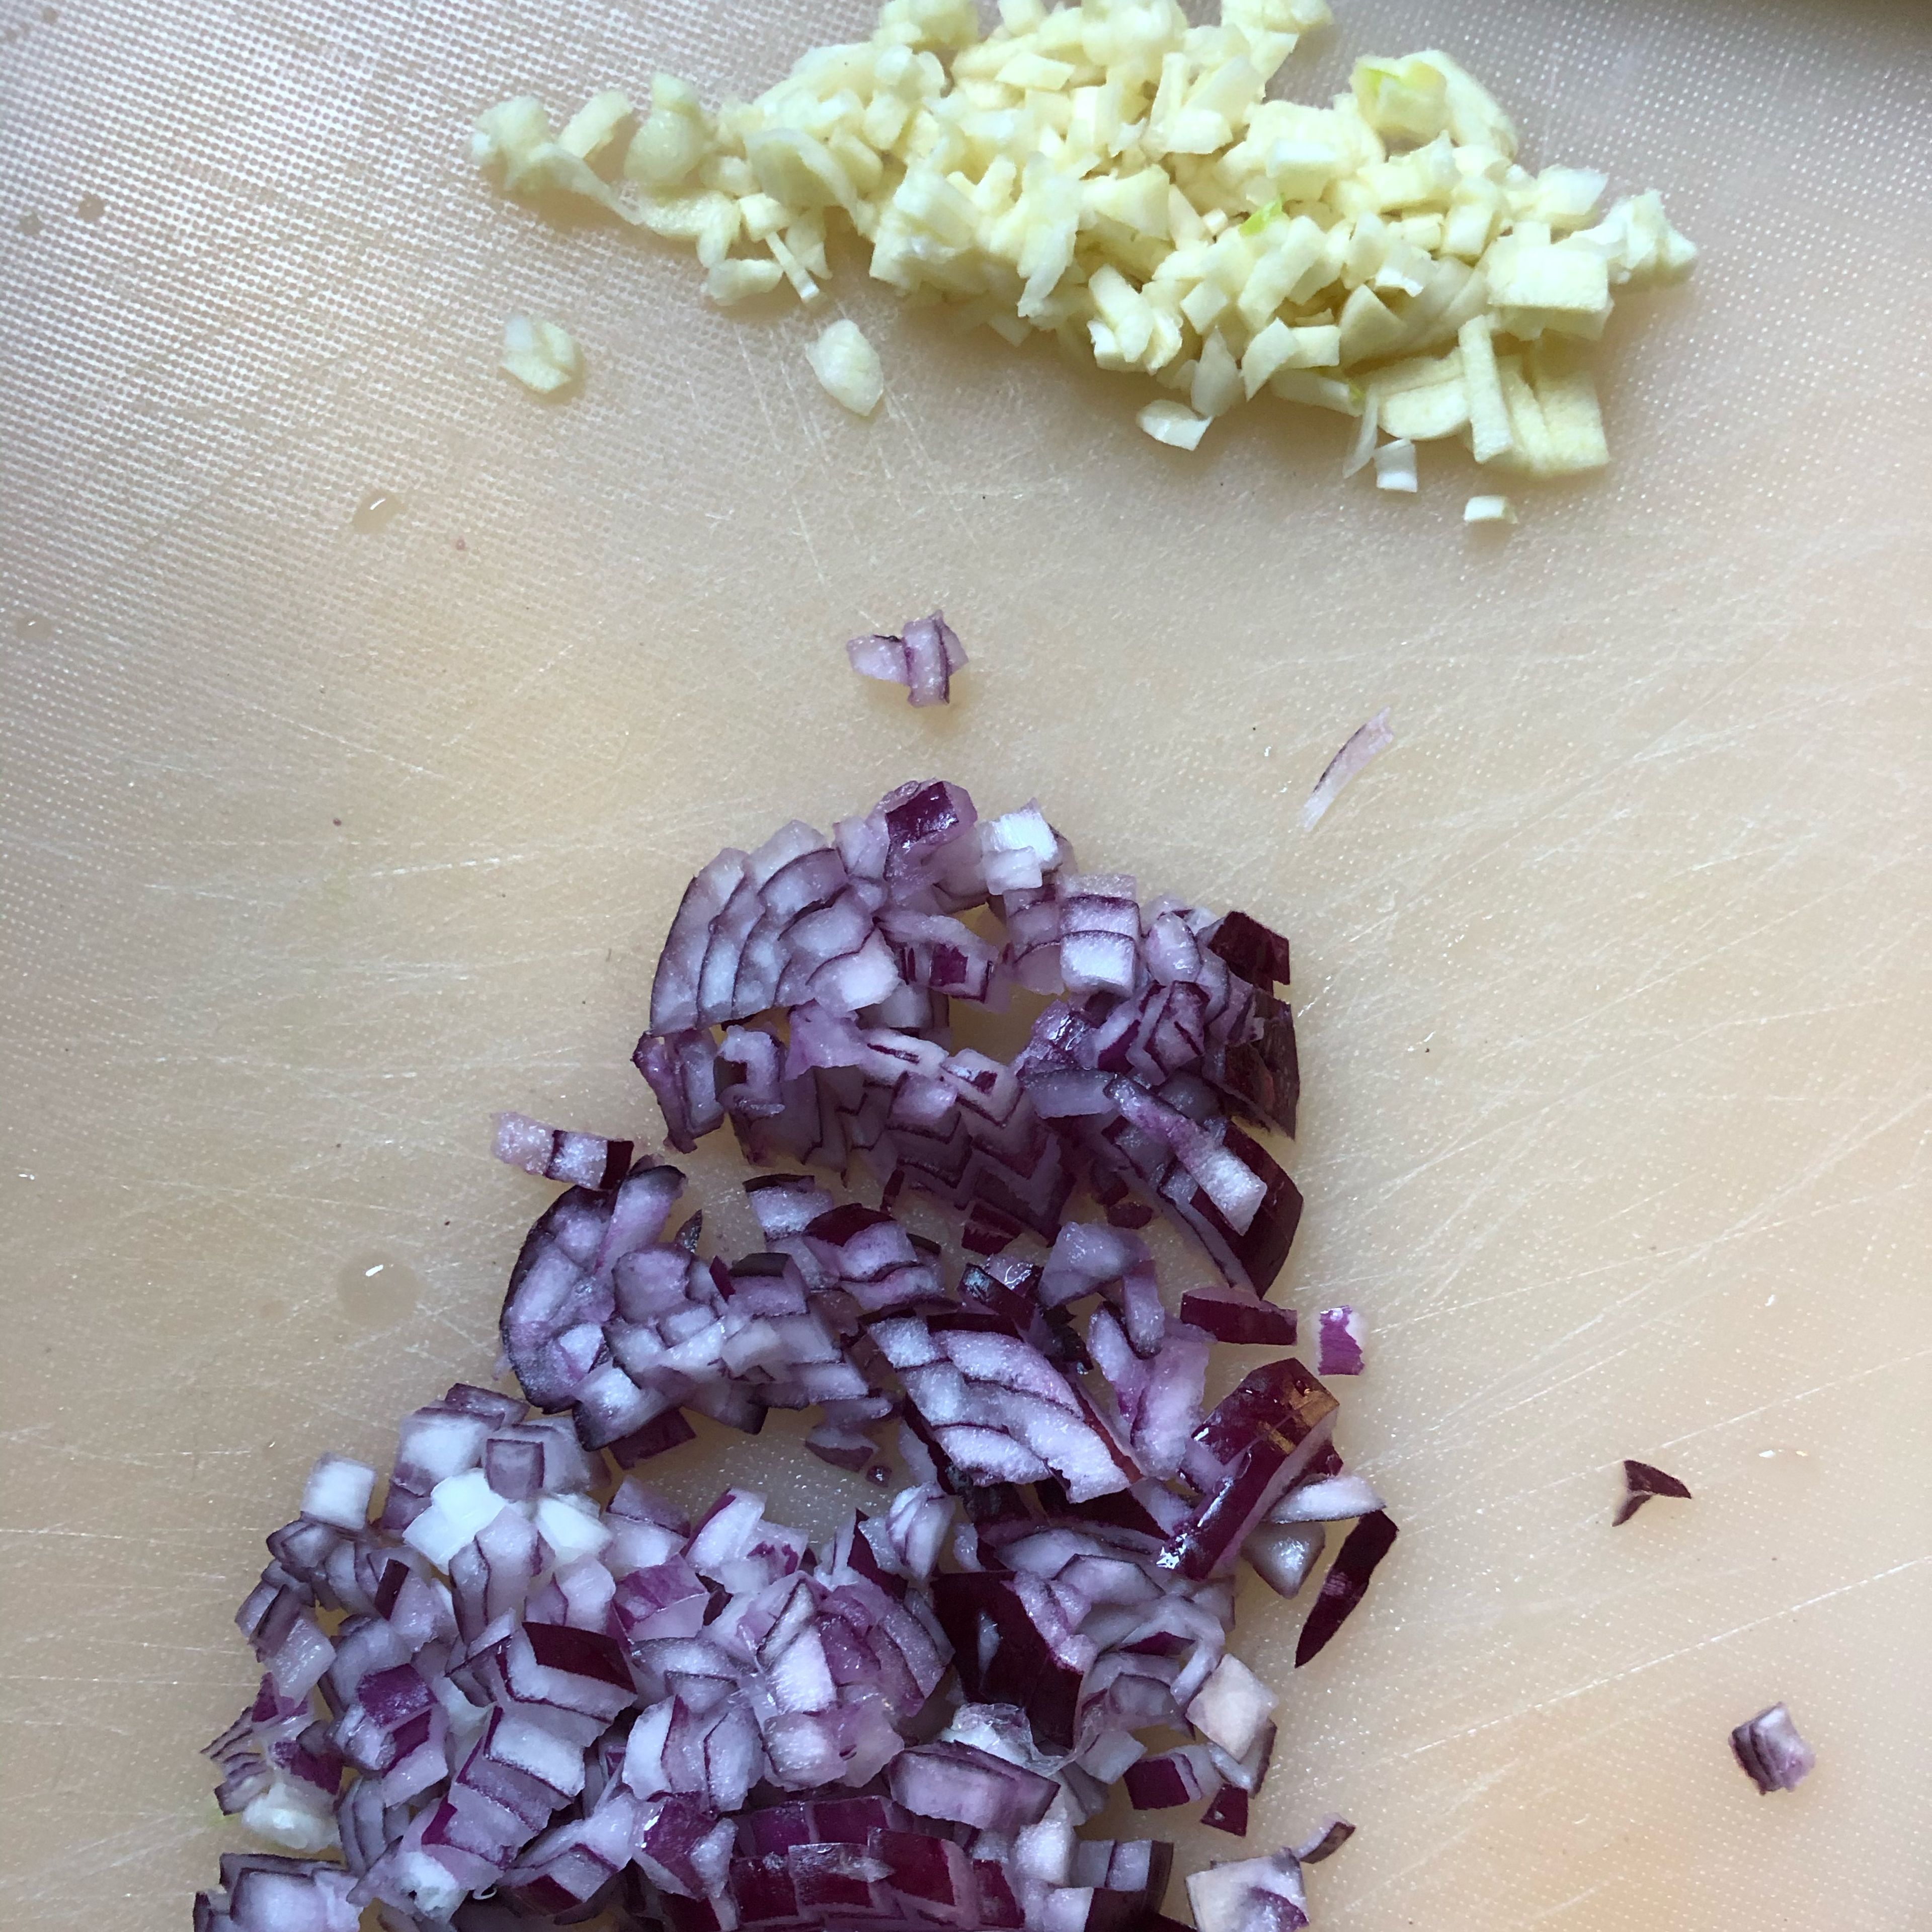 While sprouts are baking & pasta is cooking, cut onion and garlic